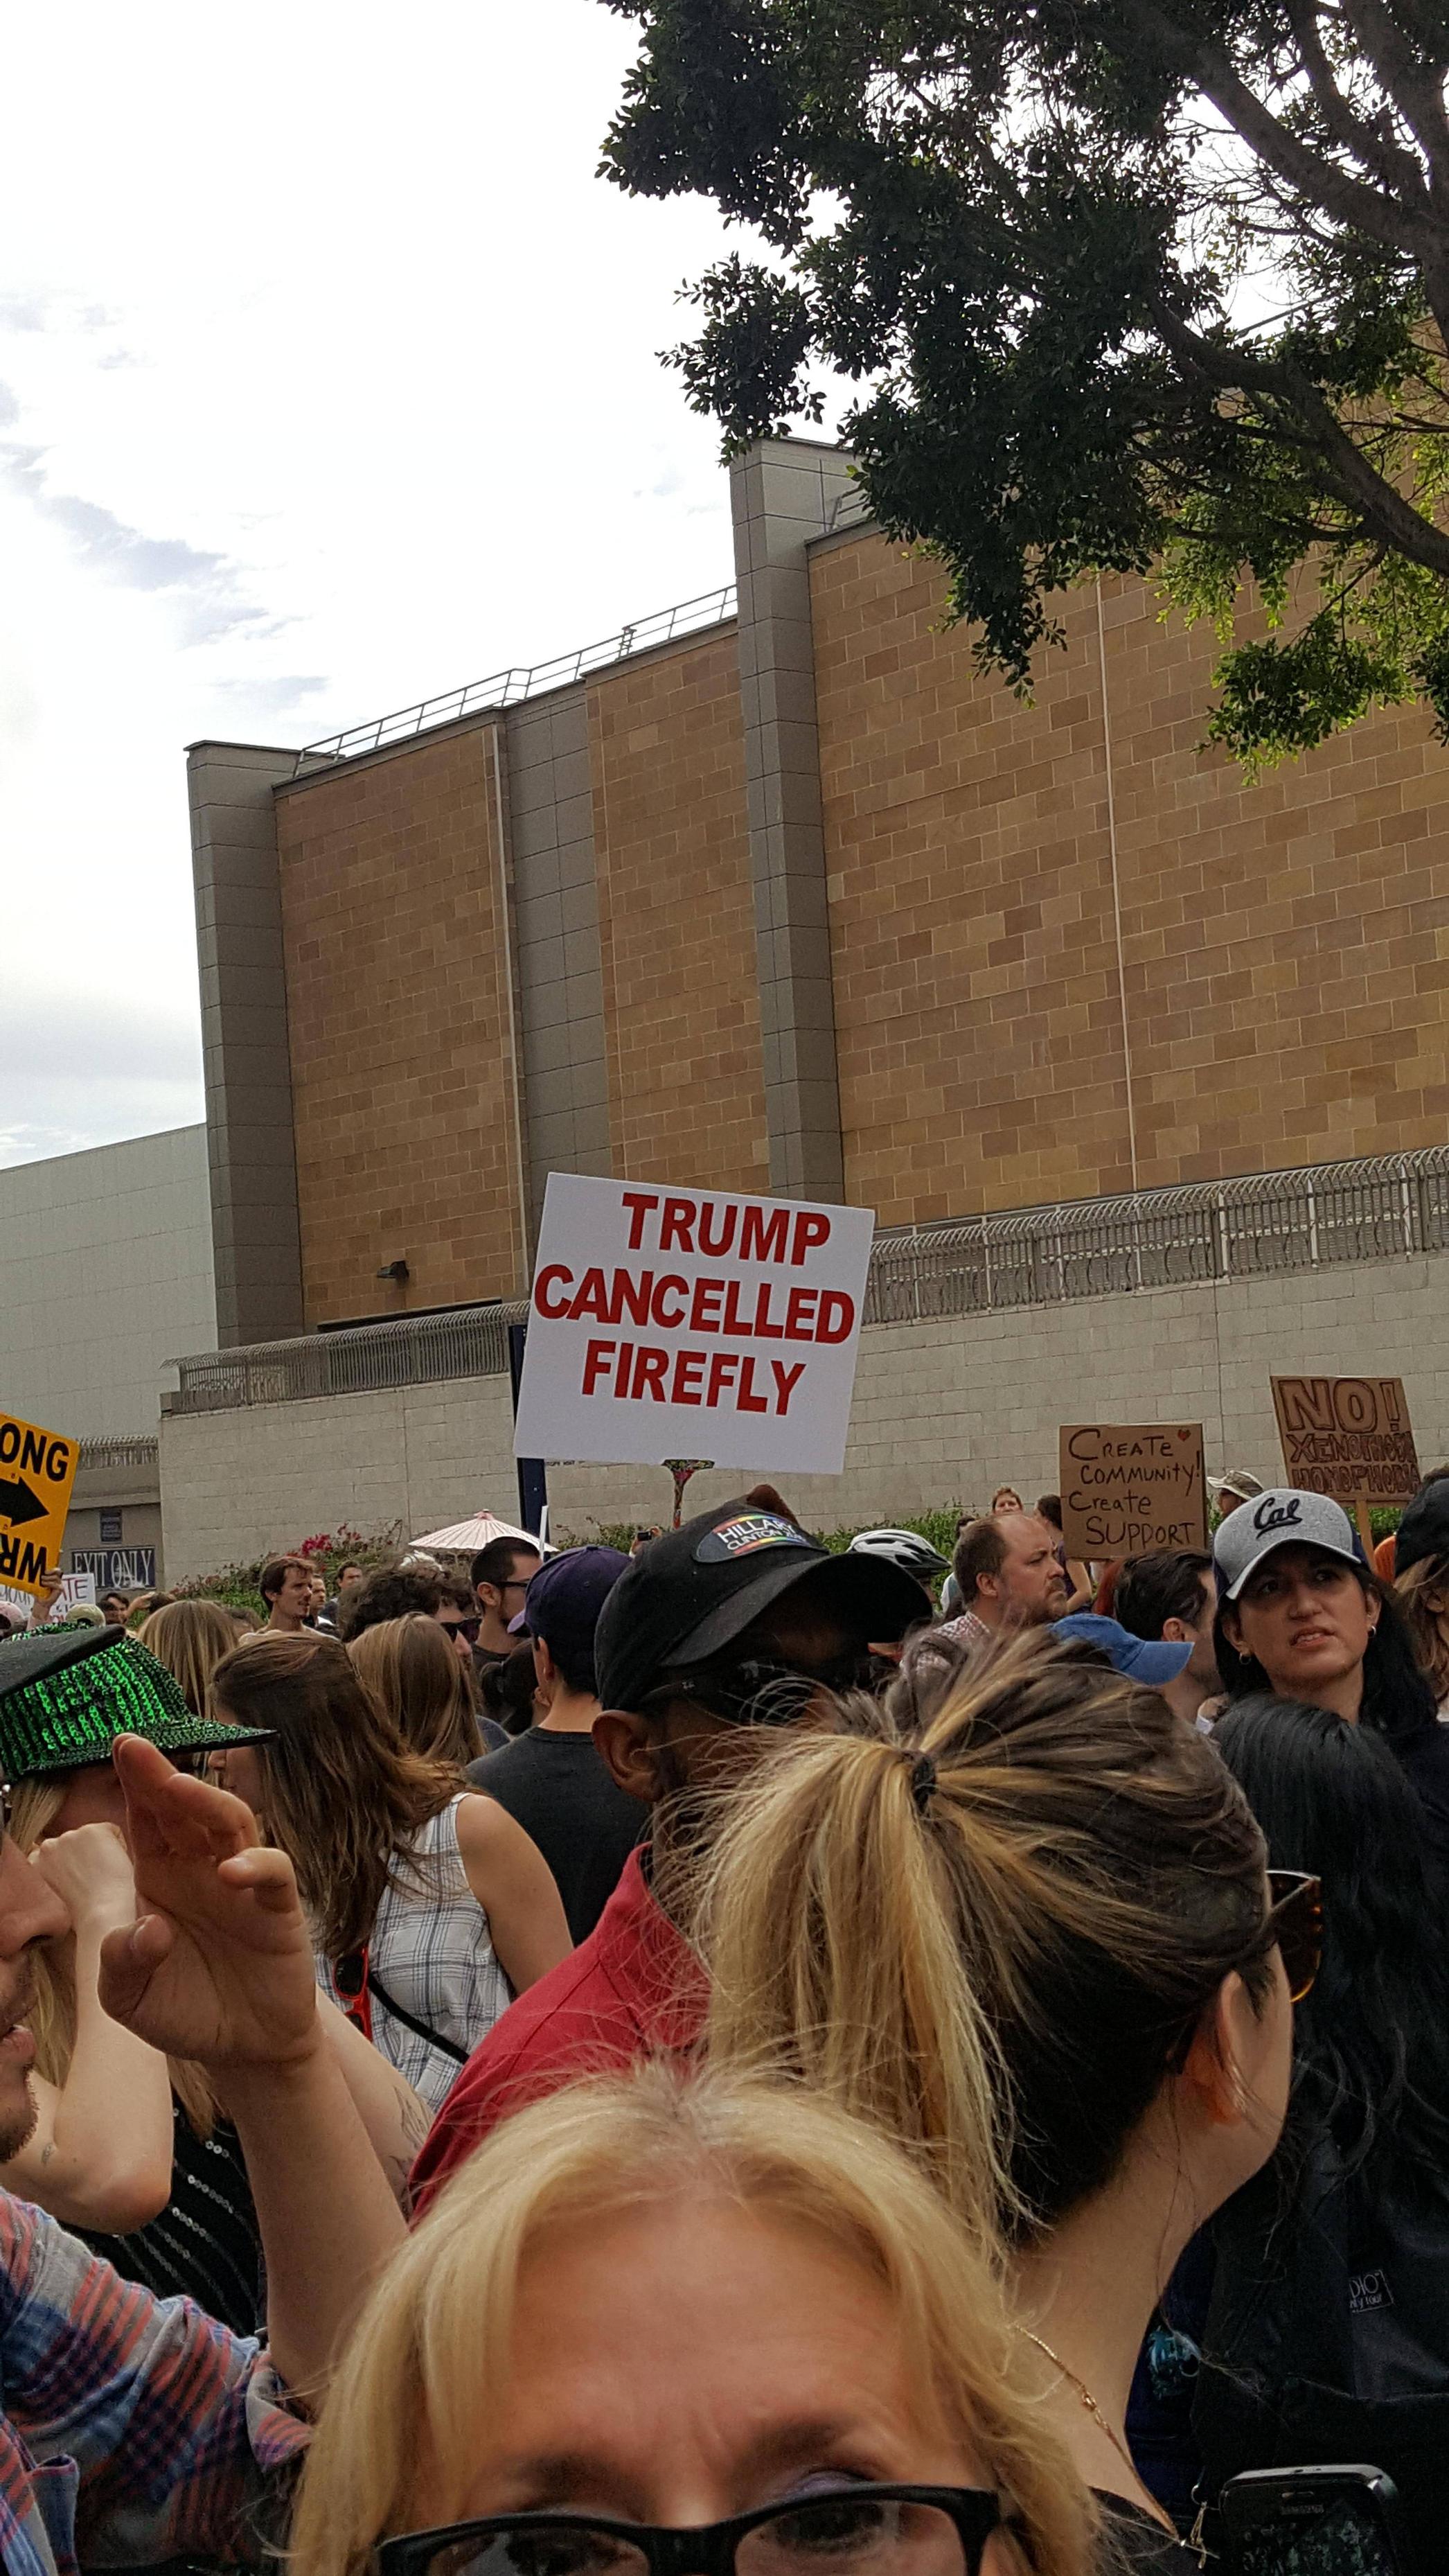 crowd - Trump Cancelled Firefly